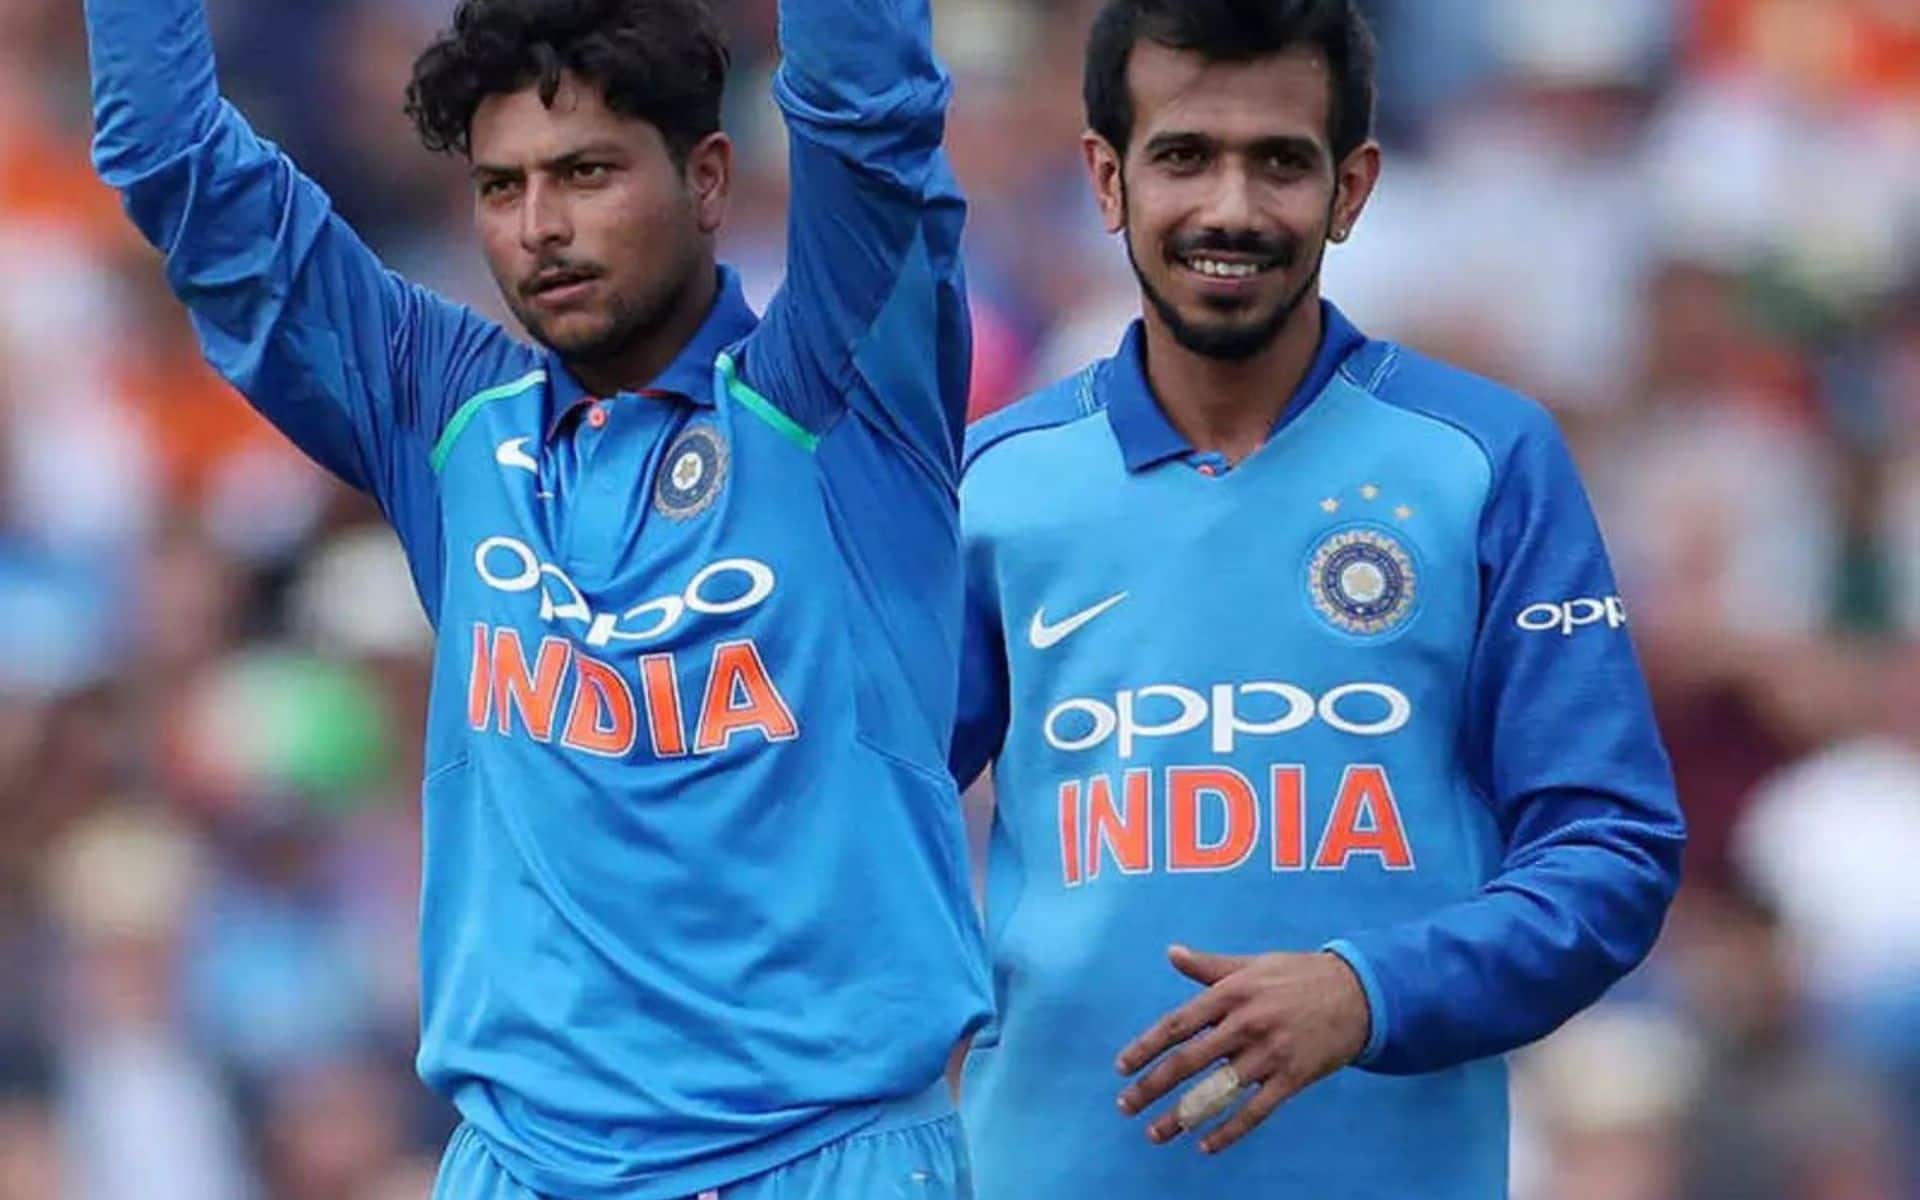 Yuzi, Kuldeep are among the 4 spinners in IND squad for T20 WC (x.com)